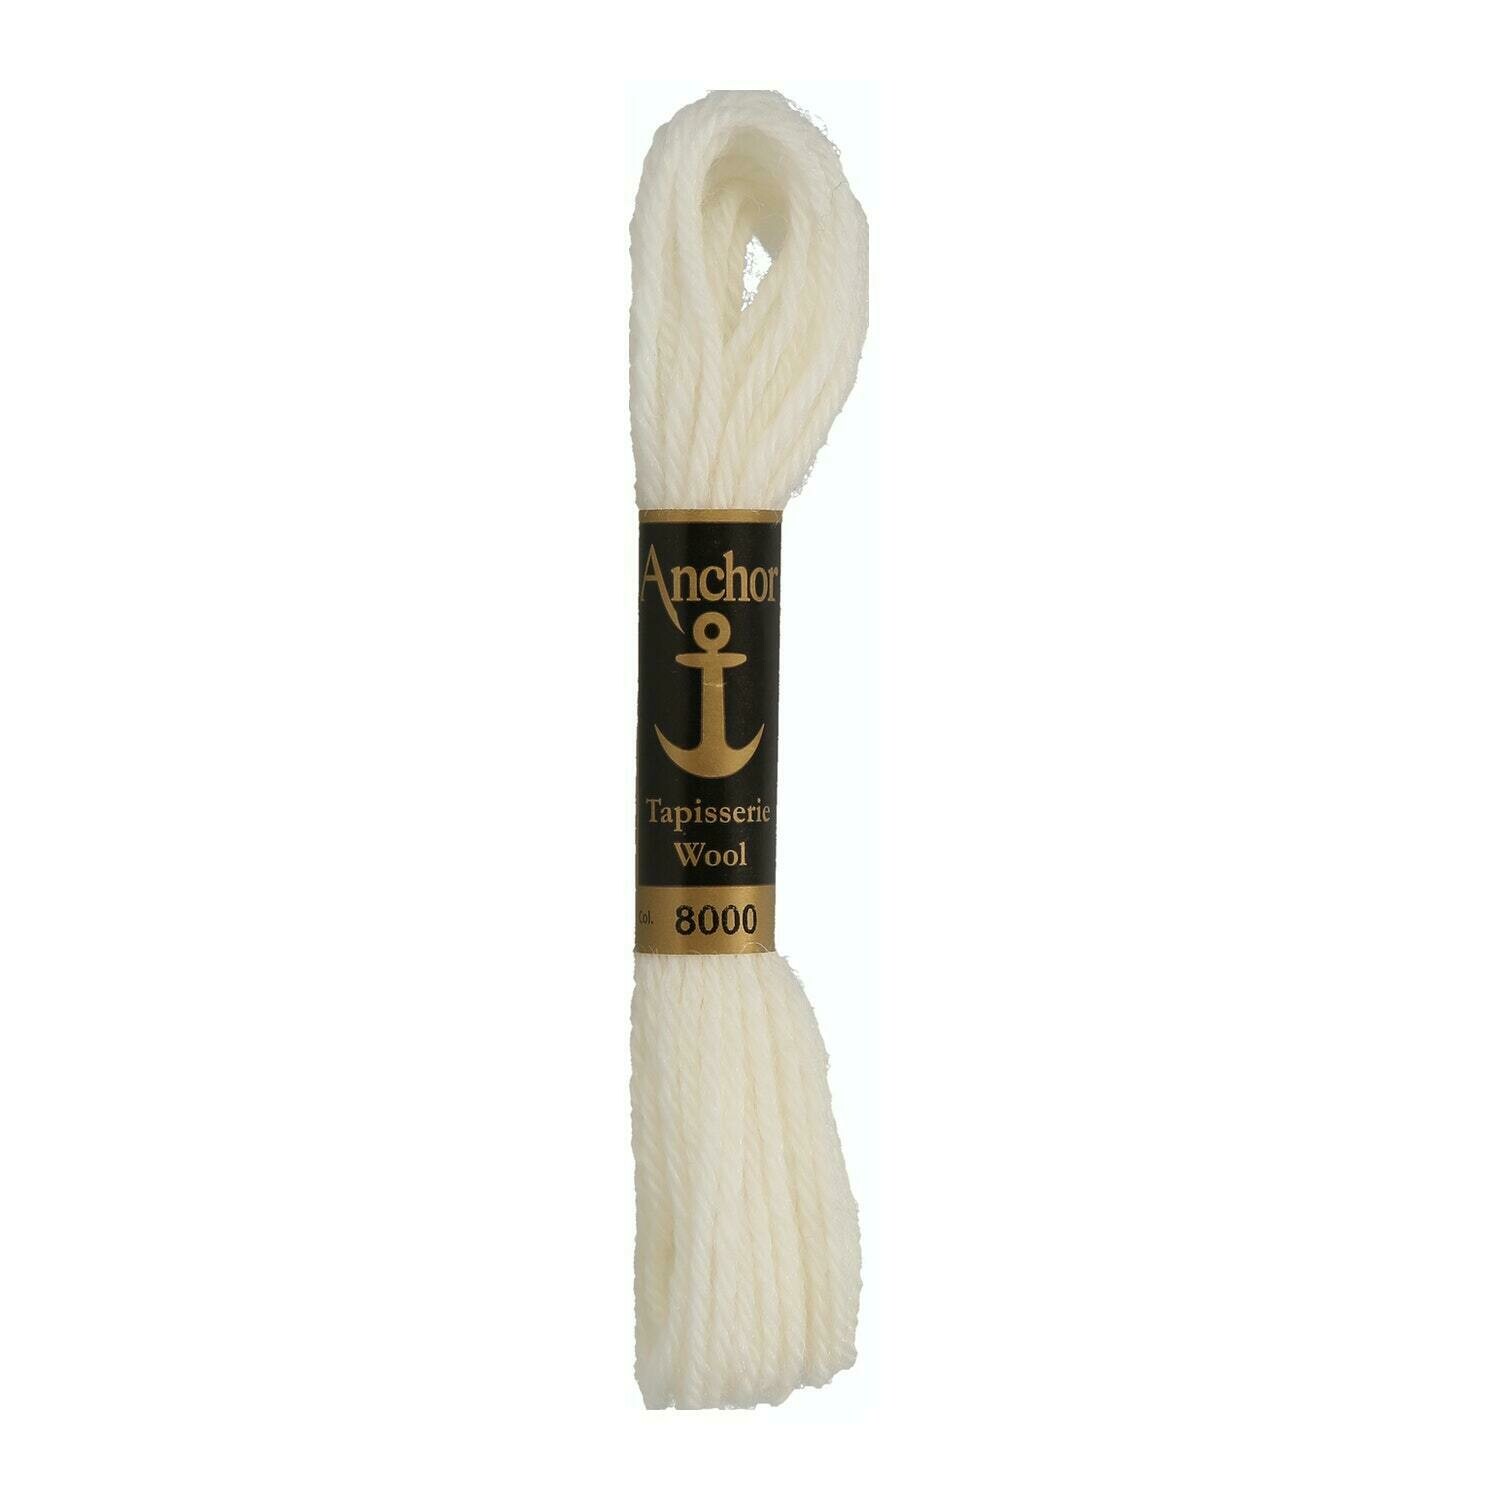 Anchor Tapisserie Wool #08000